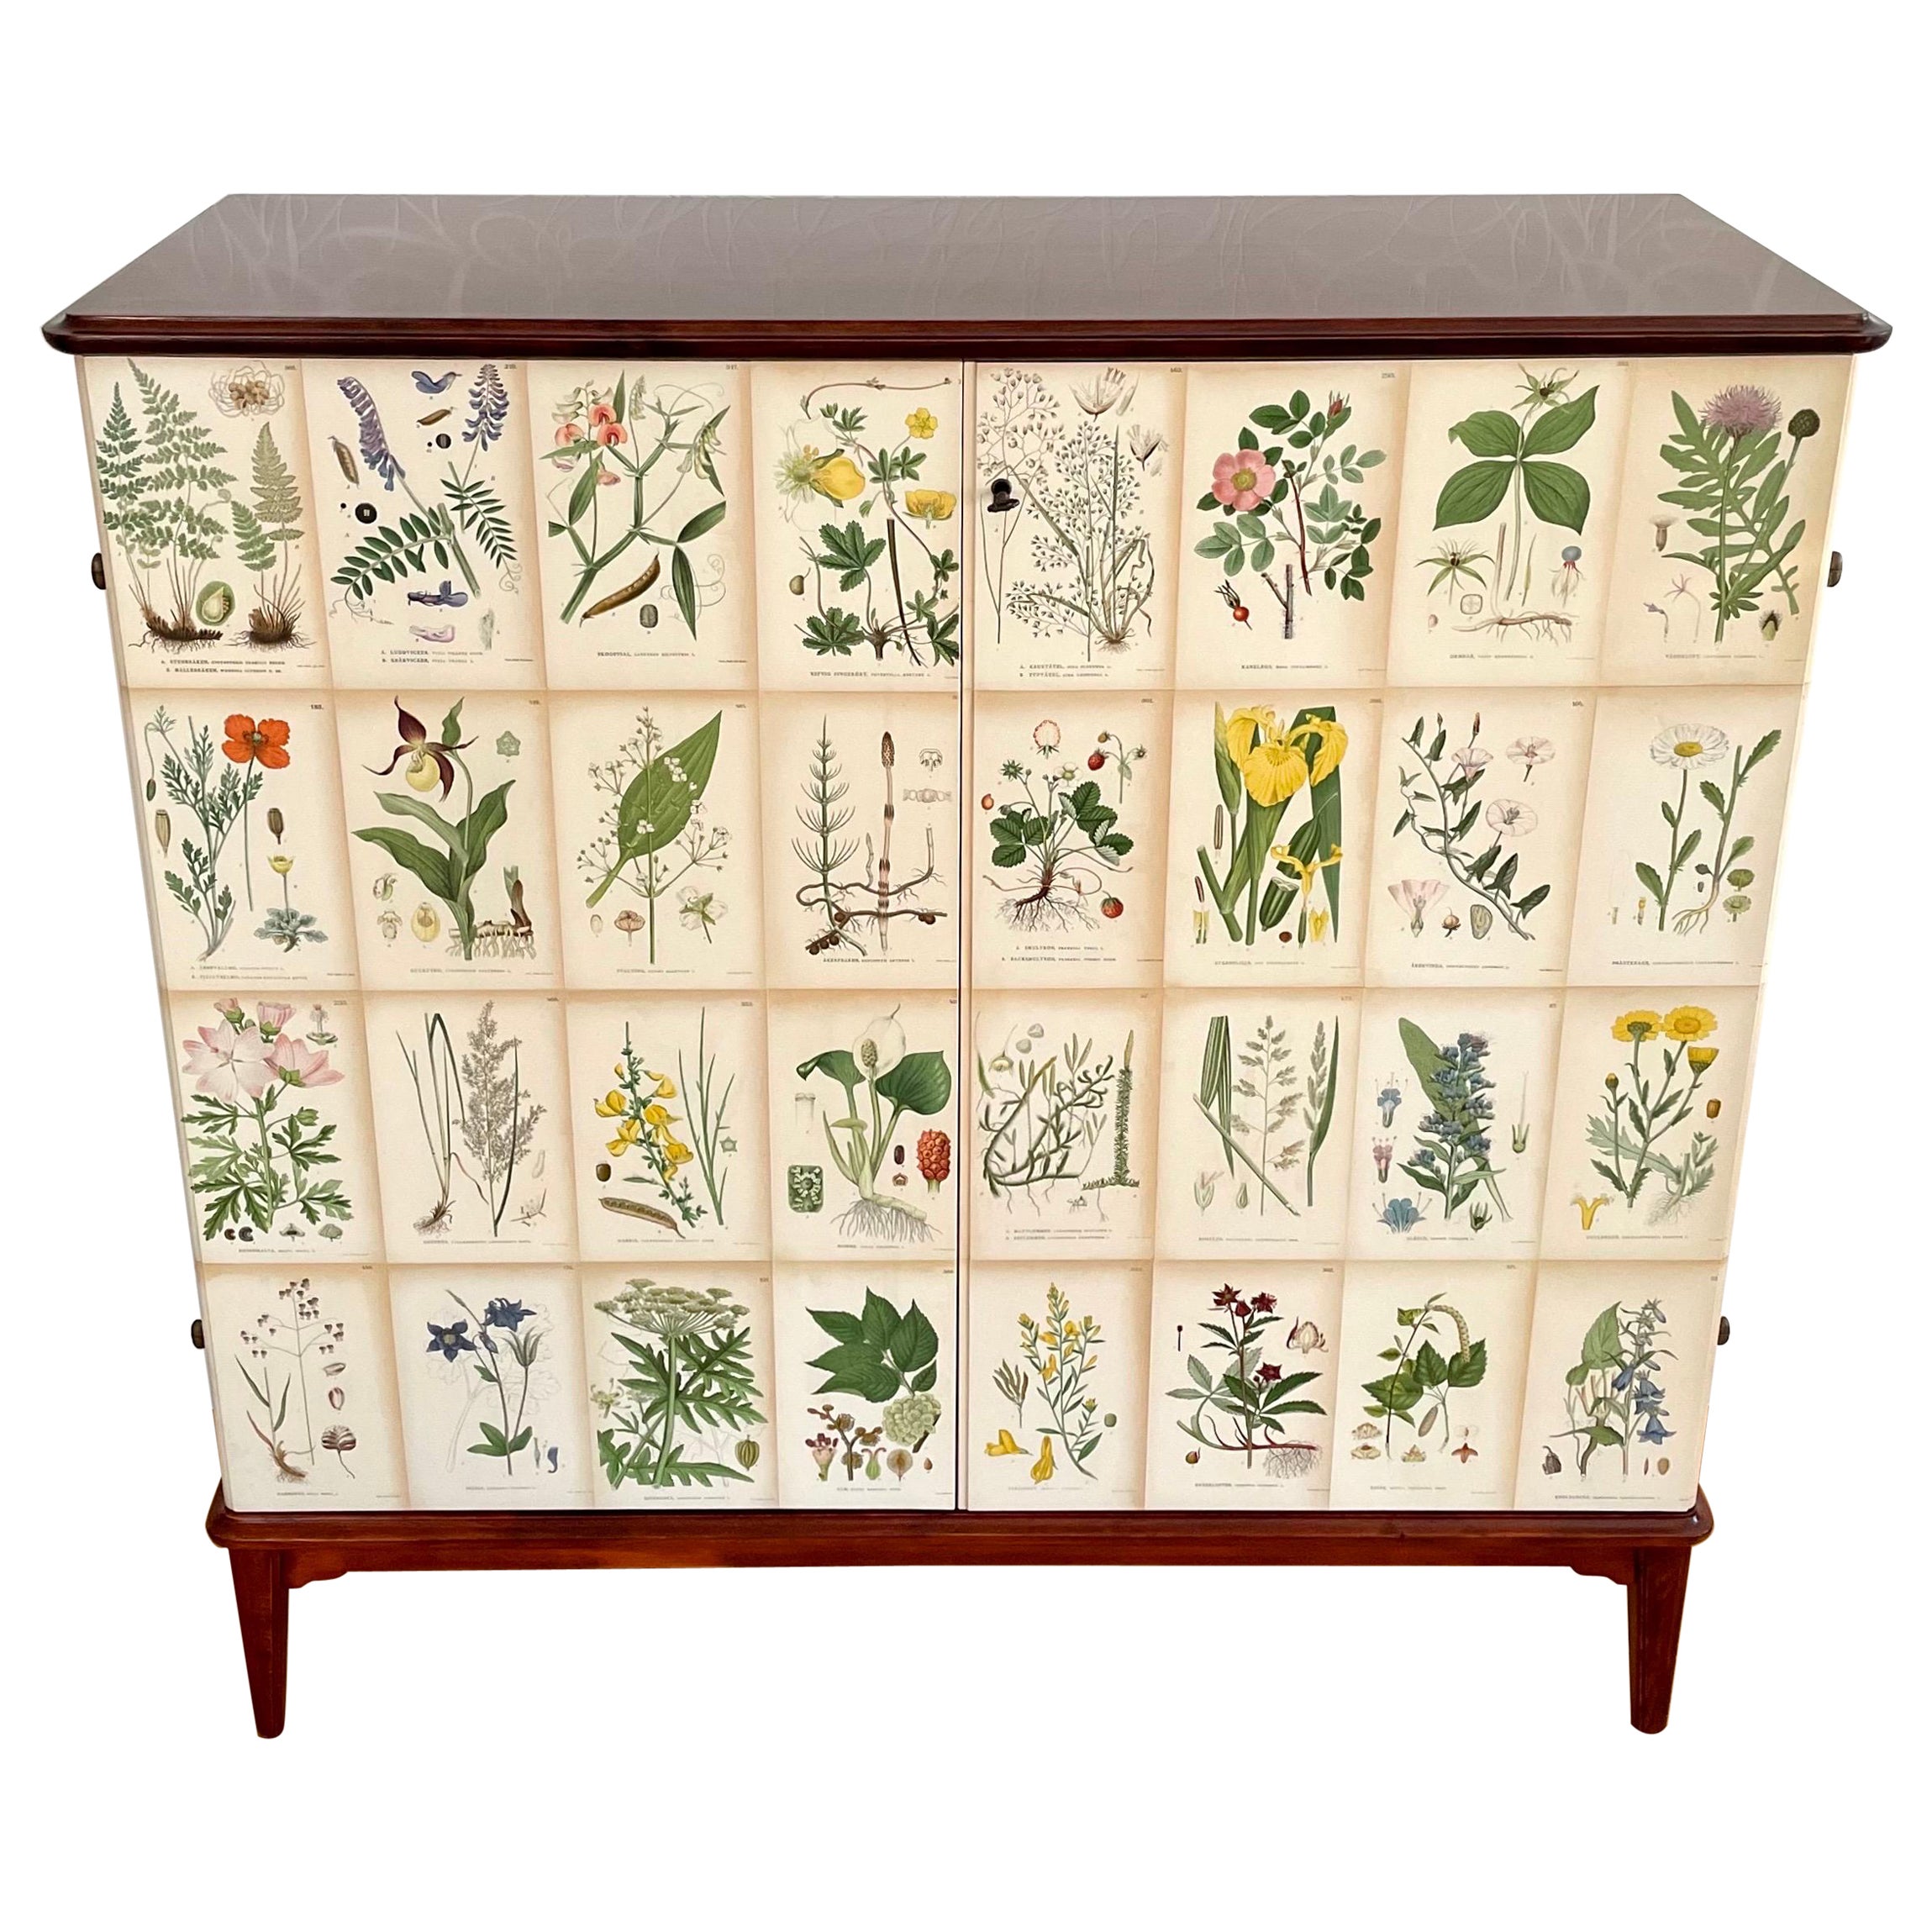 Swedish Modern 1950s Mahogny Cabinet with Nordens Flora (Nordic Flowers) Decor 
